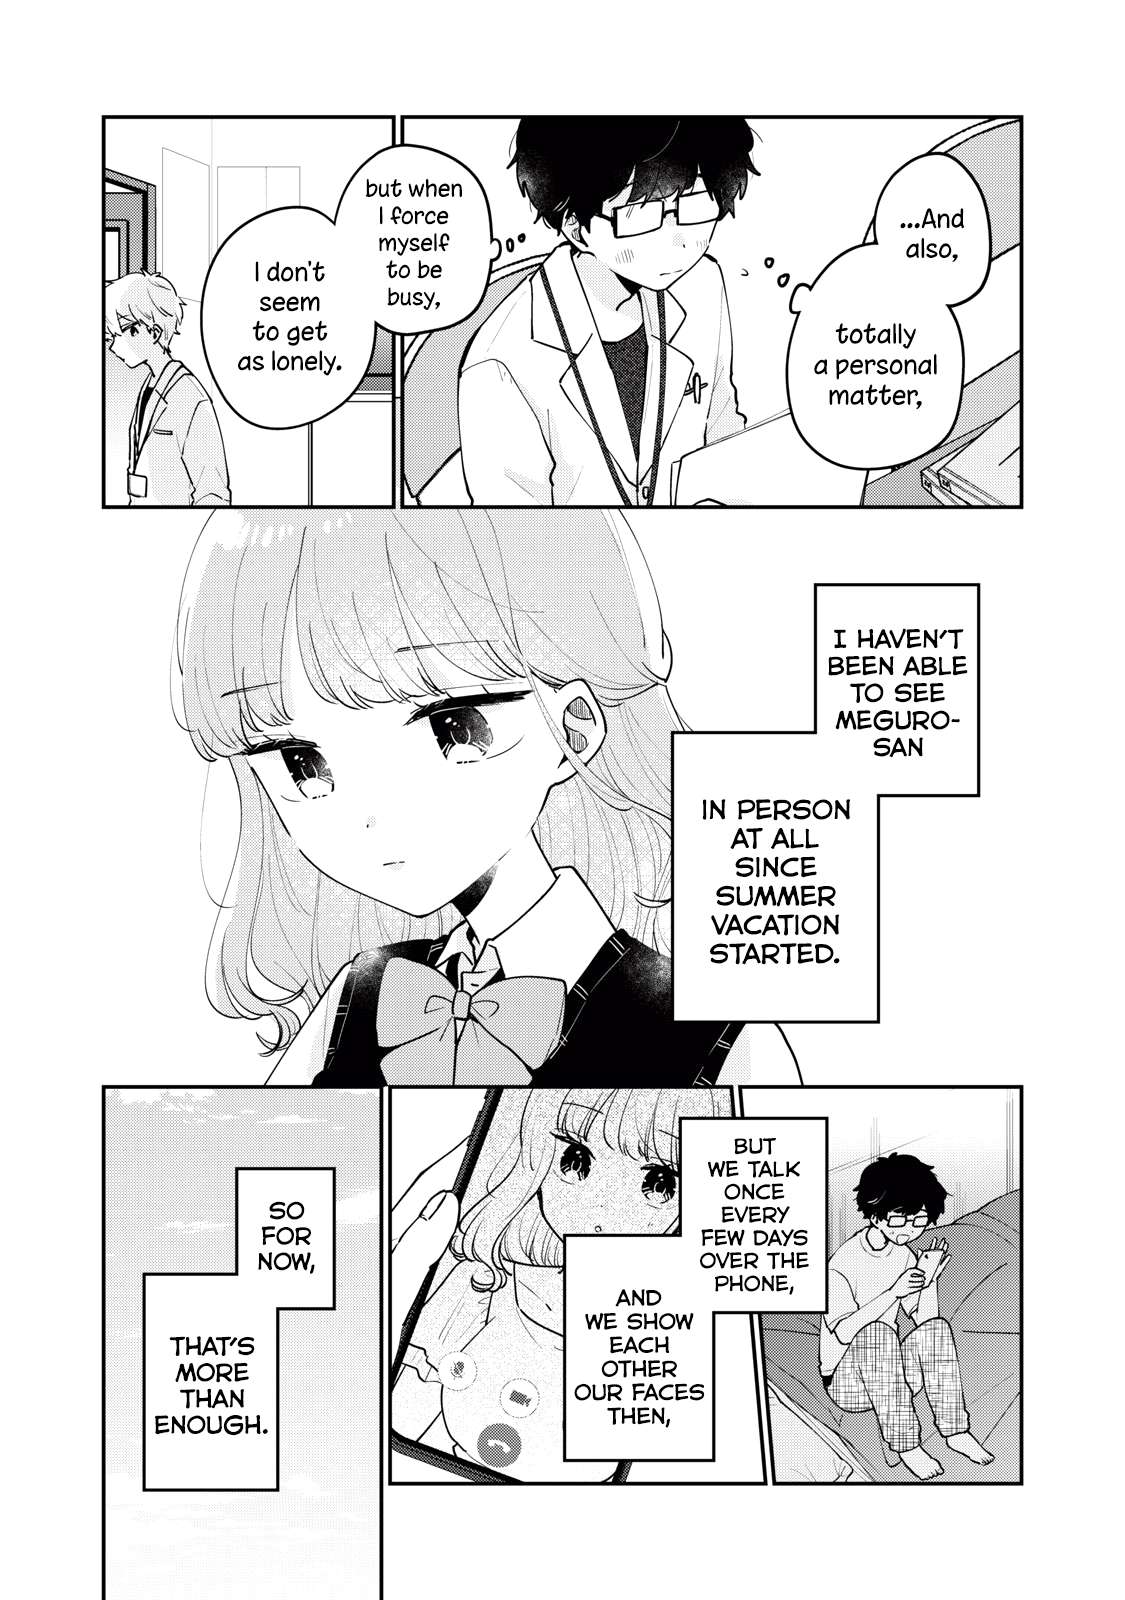 It's Not Meguro-san's First Time - chapter 73 - #4